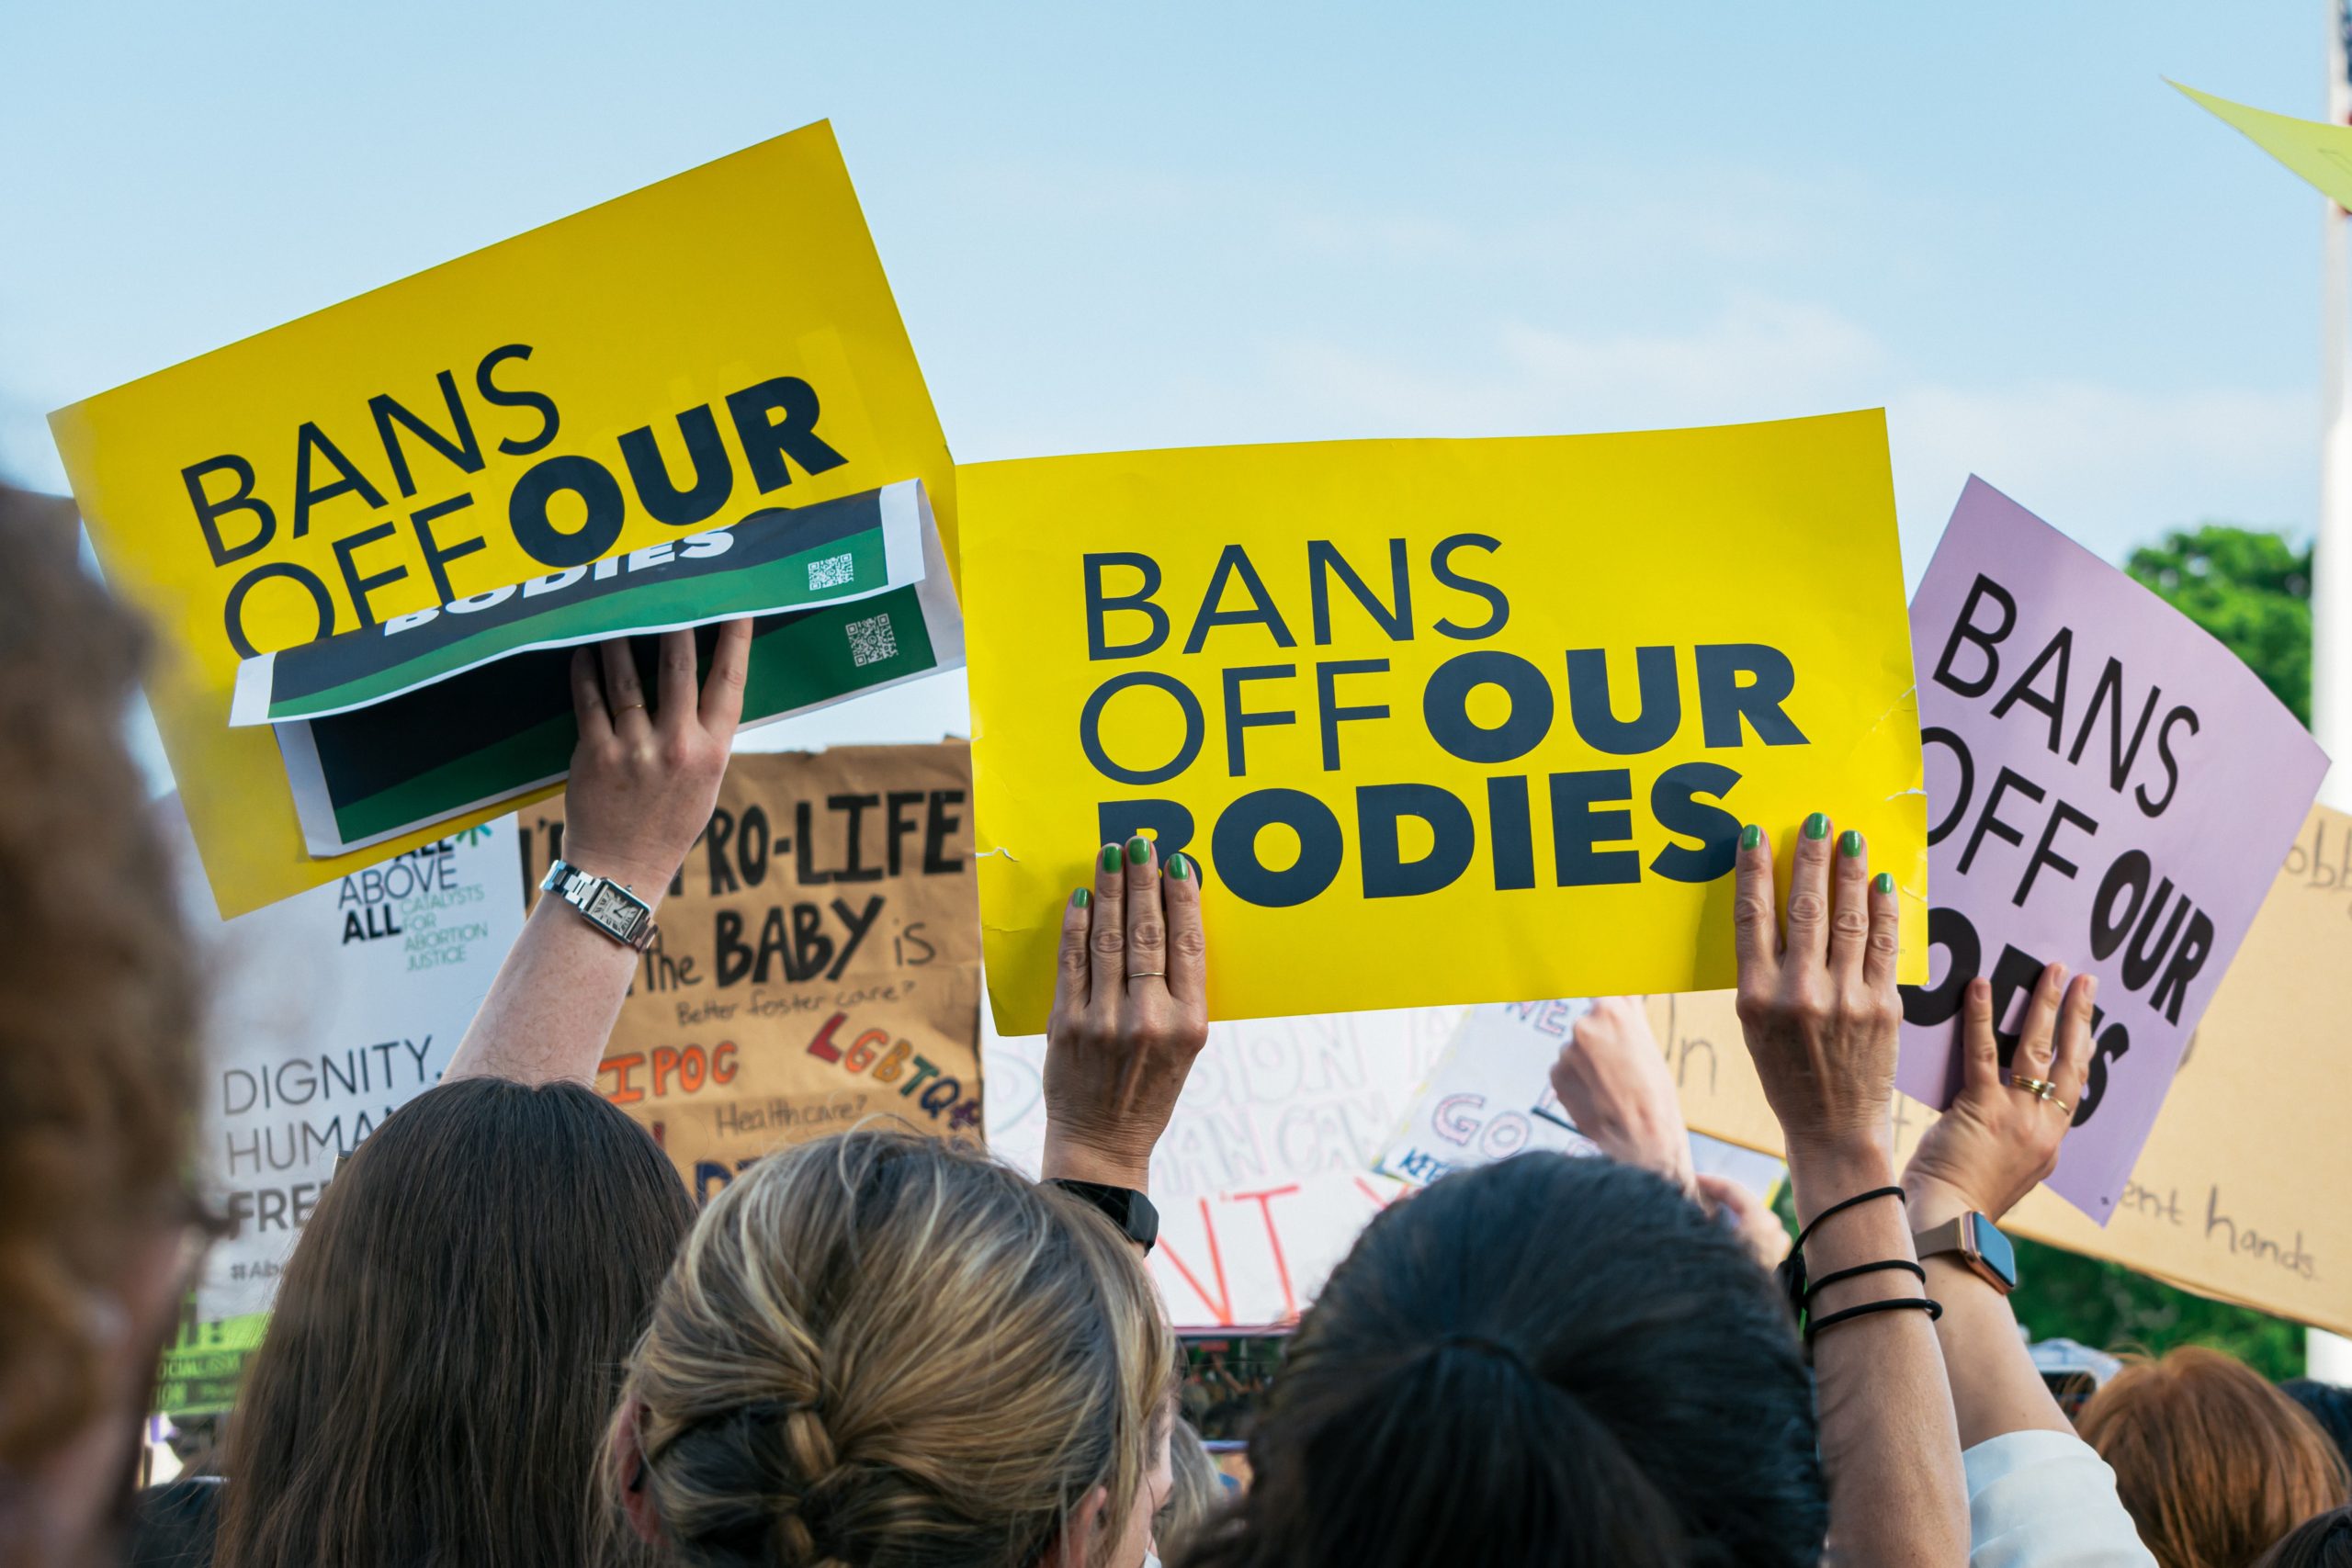 Photo of protesters holding signs saying "Bans off our bodies"